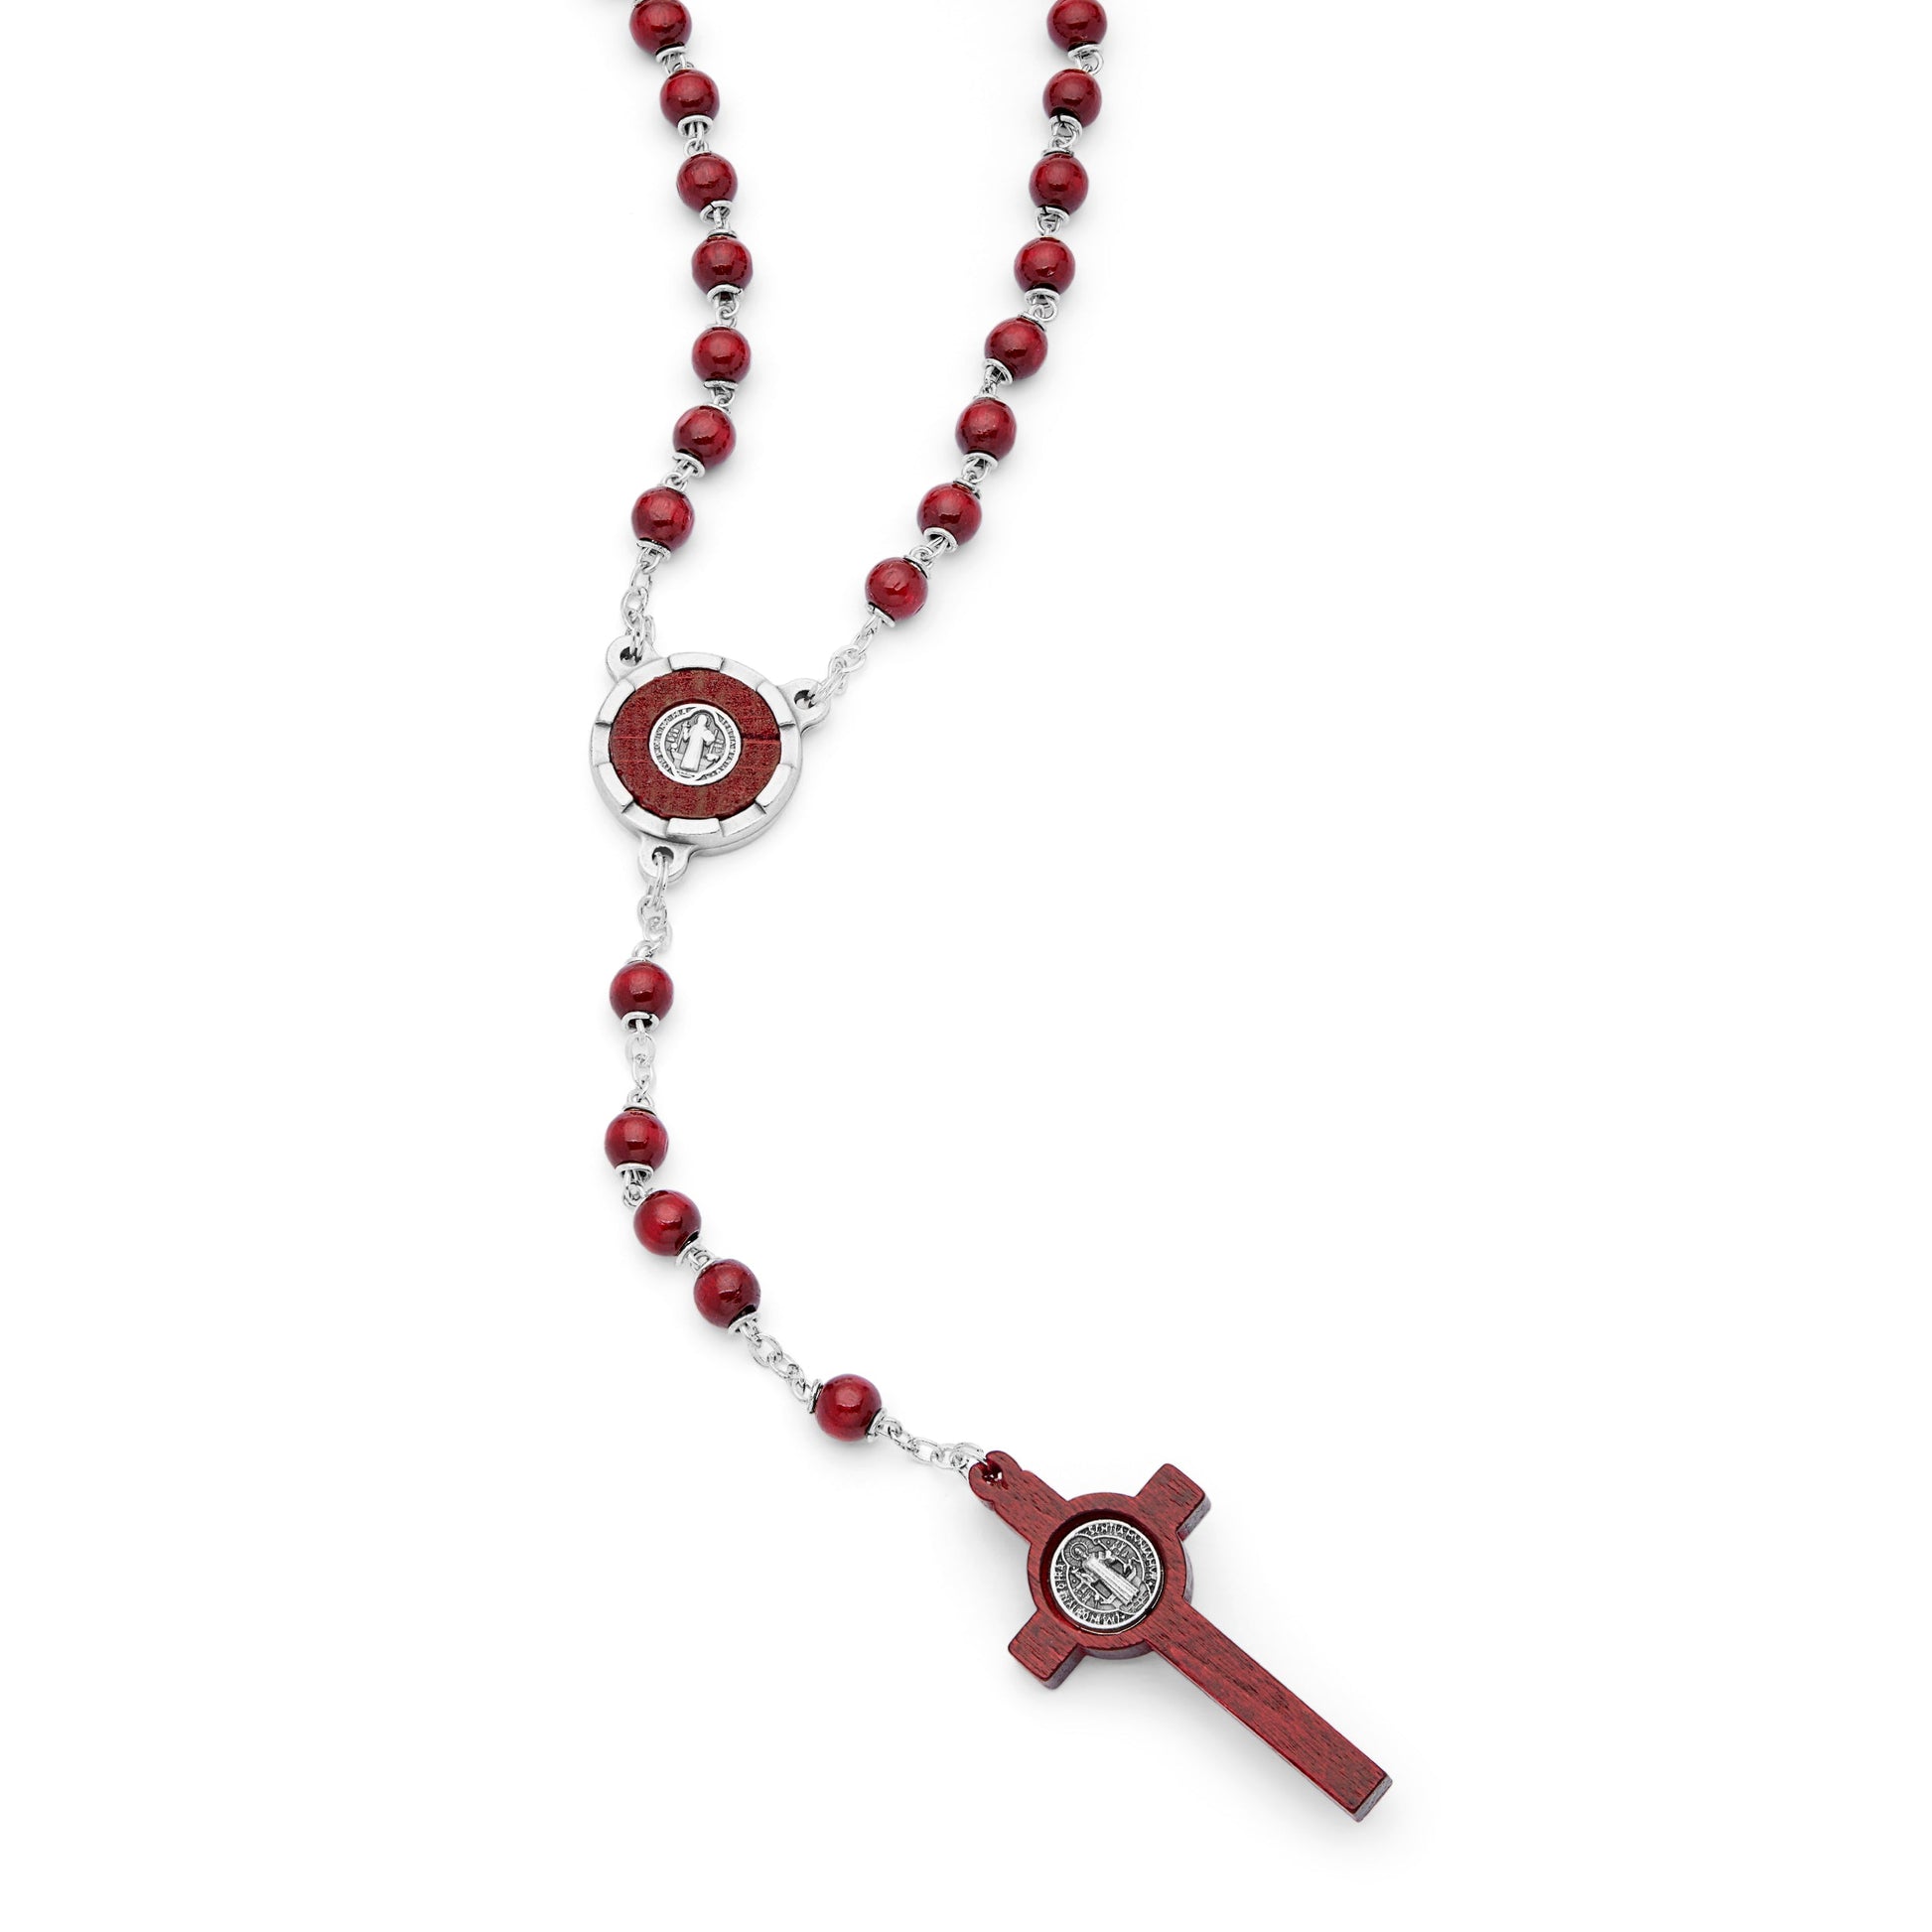 MONDO CATTOLICO Prayer Beads 49 cm (19.29 in) / 6 mm (0.23 in) Saint Benedict Red Wooden Rosary